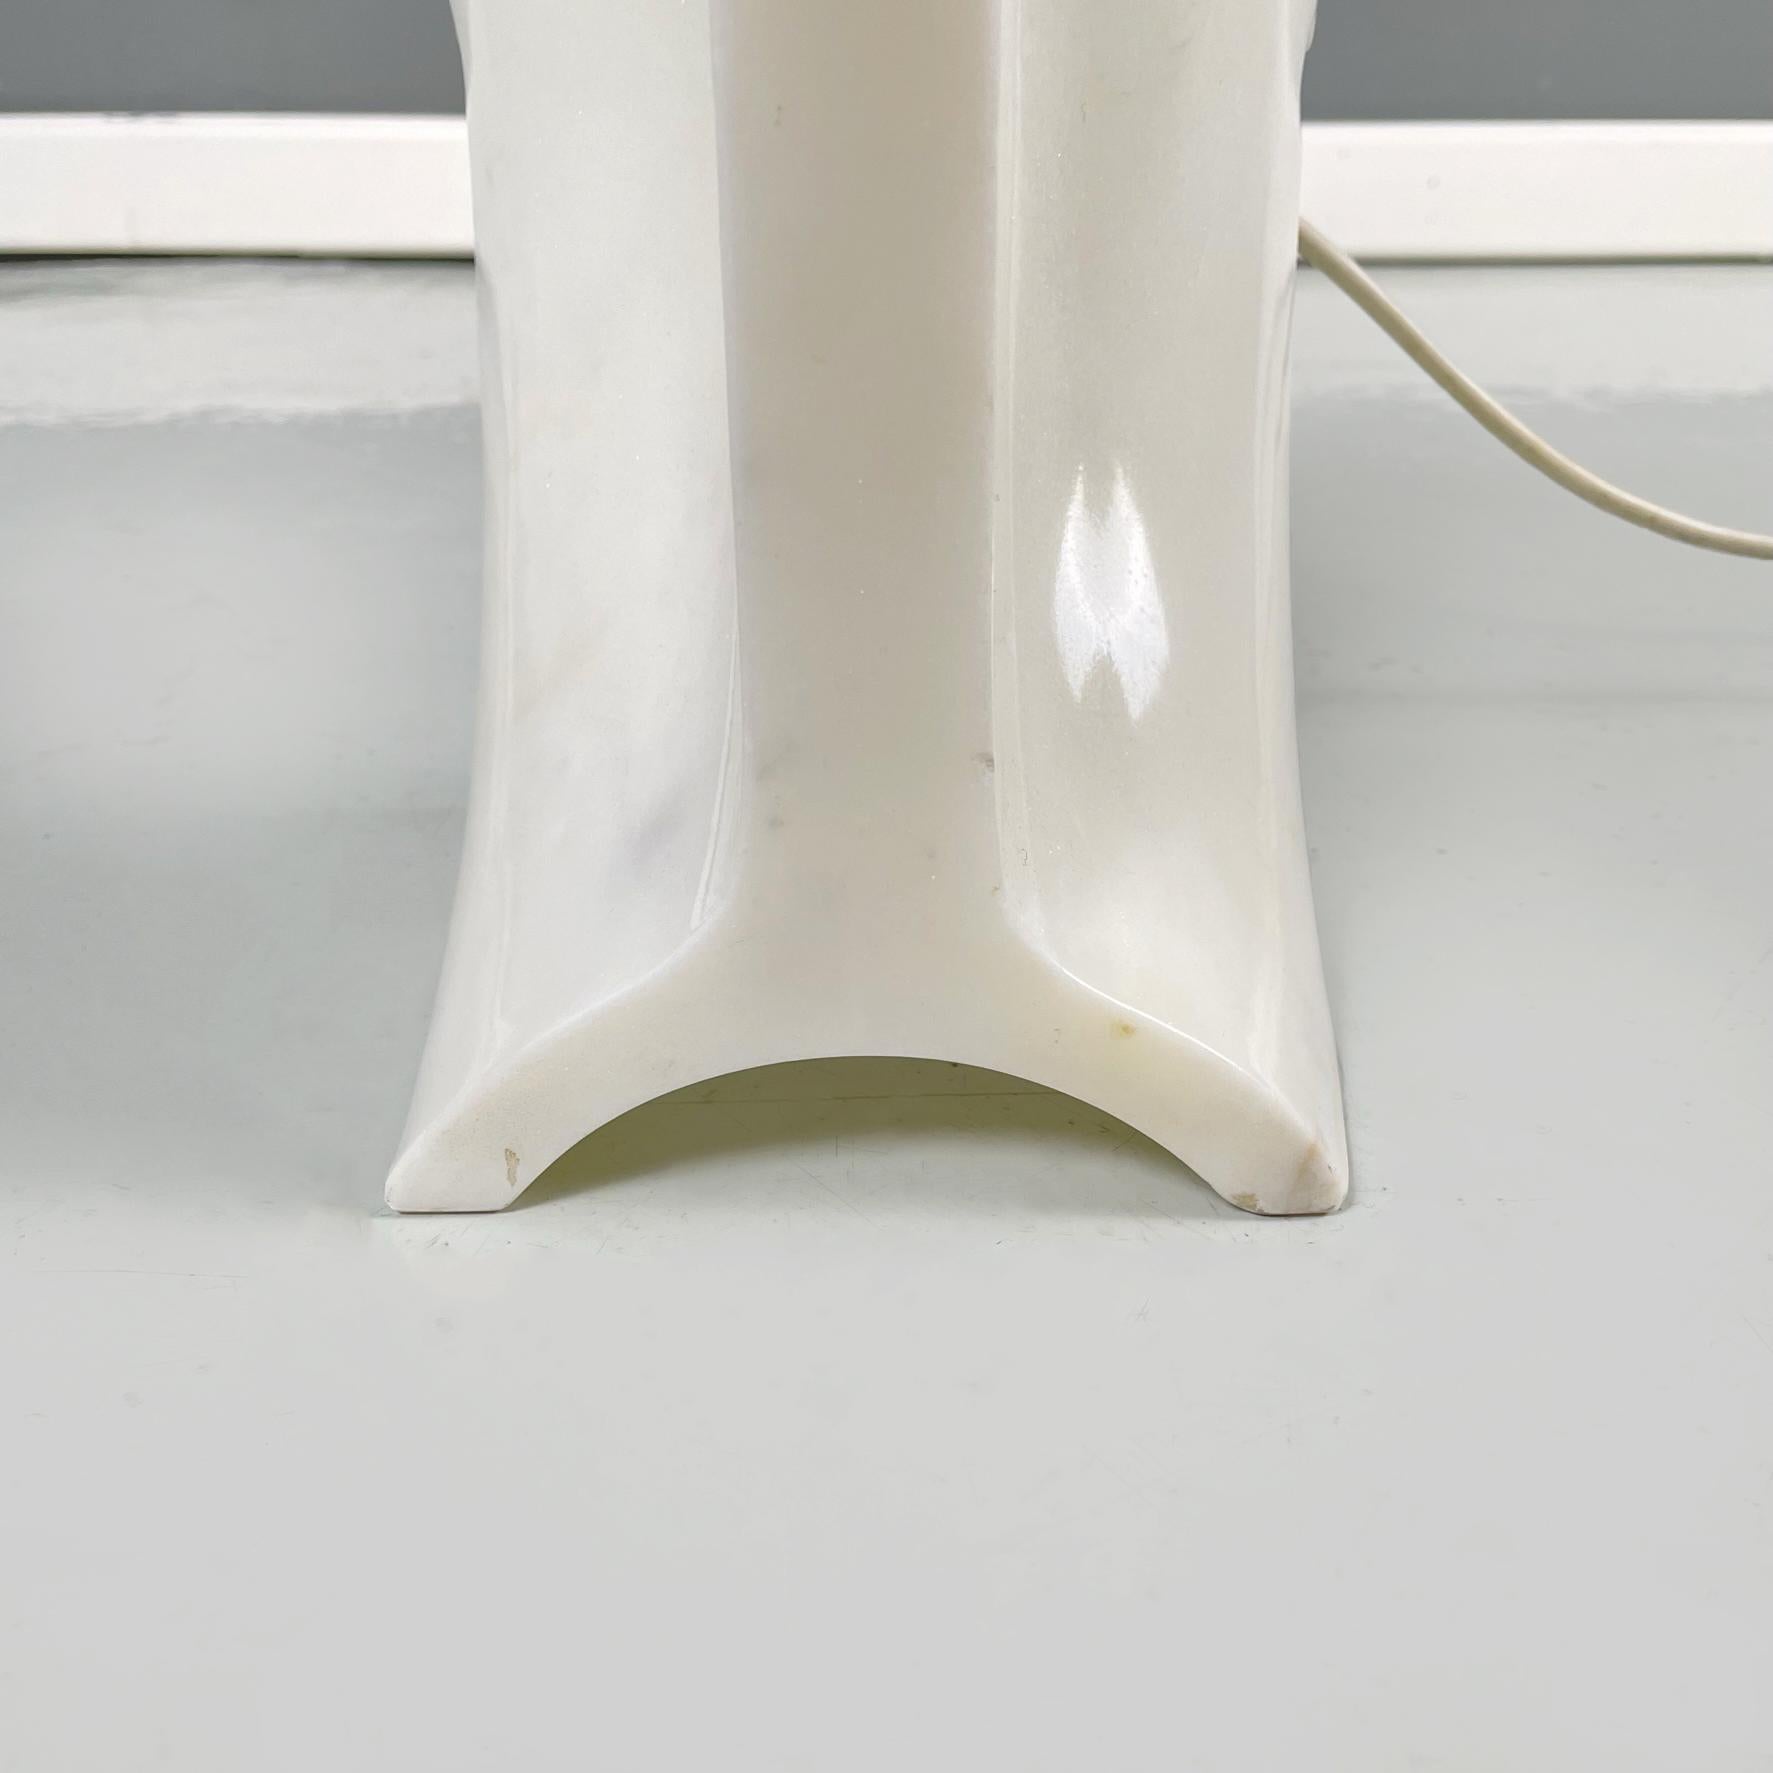 Italian Modern Carrara Marble Table Lamp Biagio by Tobia Scarpa for Flos, 1970s For Sale 8